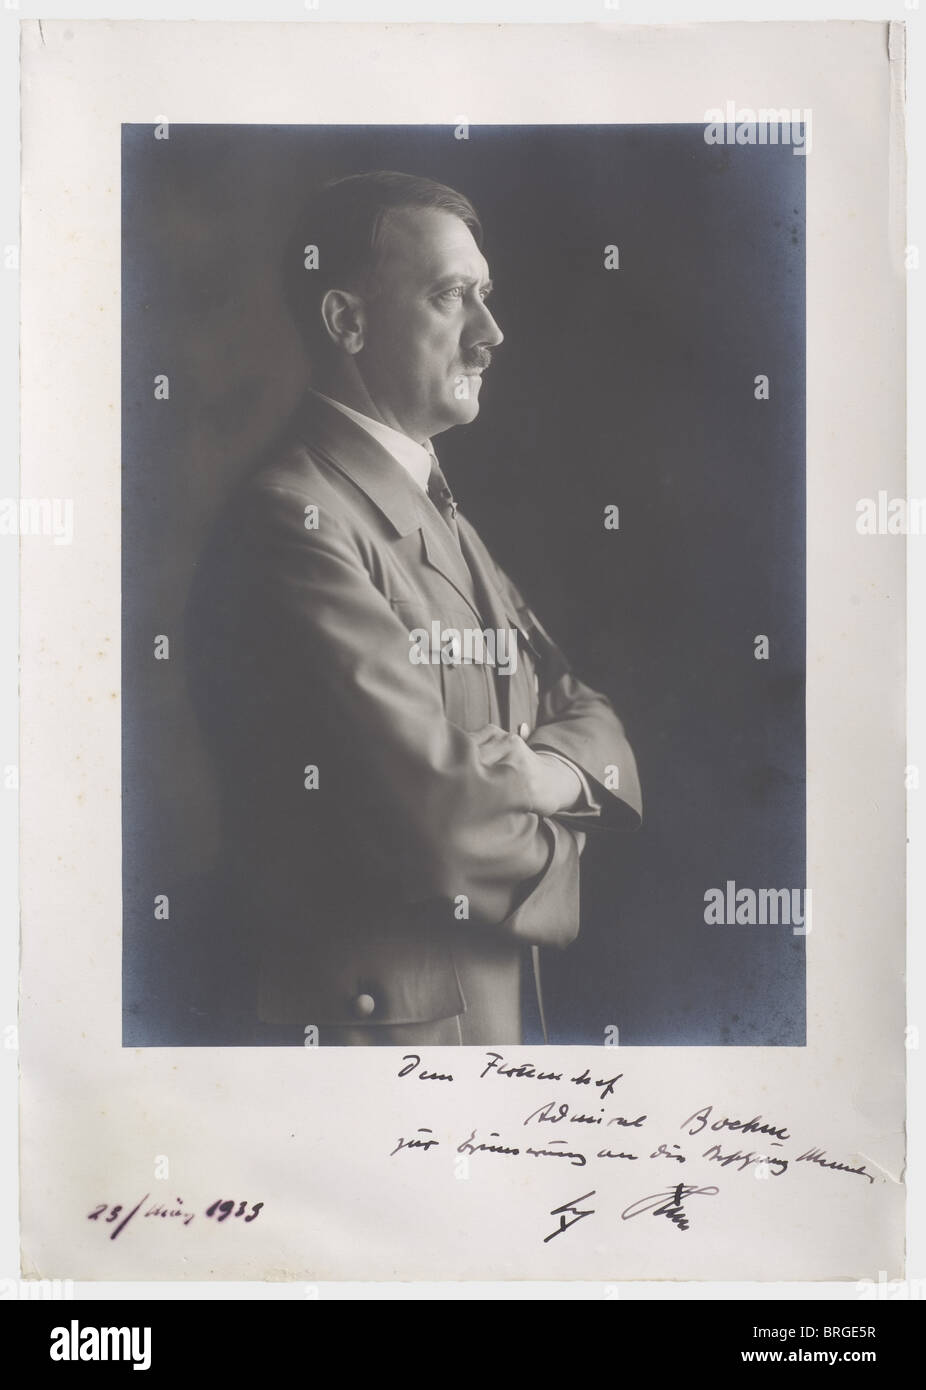 Admiral Hermann Boehm (1884 - 1972), an official presentation photograph of Adolf Hitler 1939 A large format Hoffmann portrait photo, showing Hitler in profile in party uniform. There is an autograph dedication by Hitler on the passepartout, 'Dem Flottenchef Admiral Boehm zur Erinnerung an die Besetzung Memels - Adolf Hitler' (To Fleet Commander Admiral Boehm in Commemoration of the Occupation of Memels - Adolf Hitler) along with the date '23/März 1939'. Hermann Boehm, was among other things, a torpedo boat commander in the First World War. Discharged as a lieu, Stock Photo